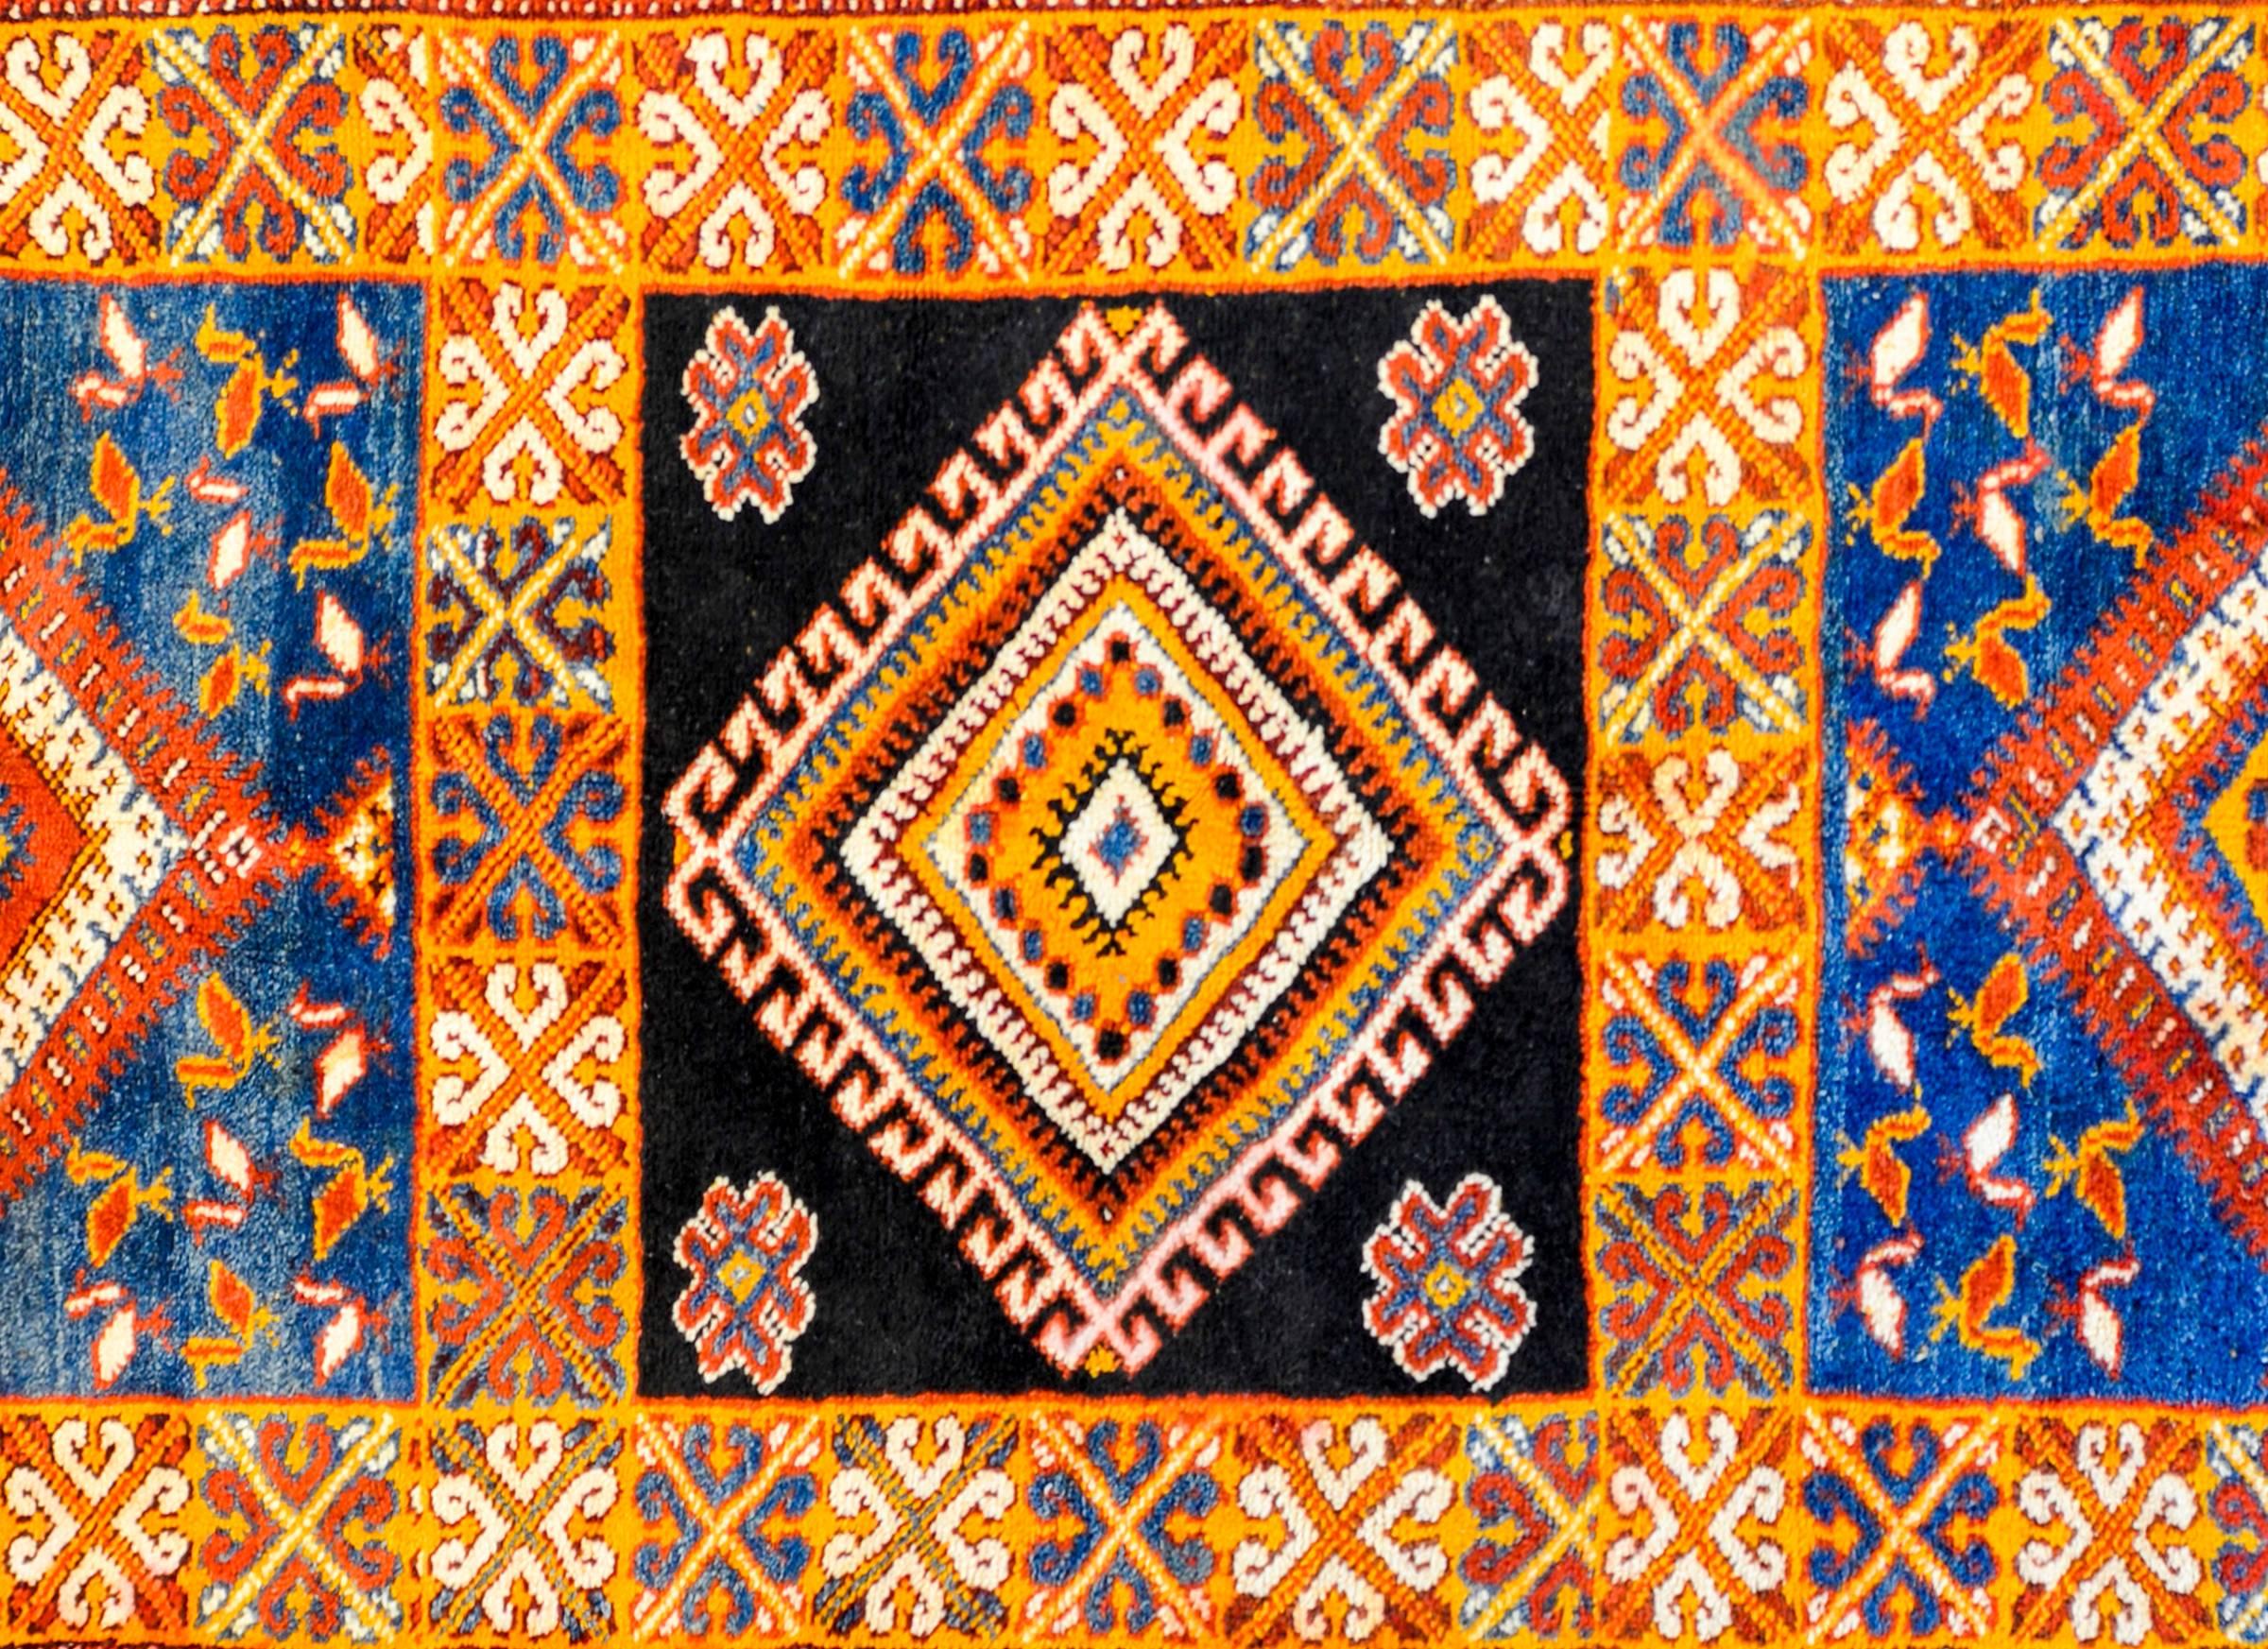 A bold vintage Moroccan runner with a diamond medallion on a black background flanked by two matching medallions woven with a fantastic palate of brilliant crimson, indigo, orange, and gold vegetable dyed wool, amidst a field of red and white birds.